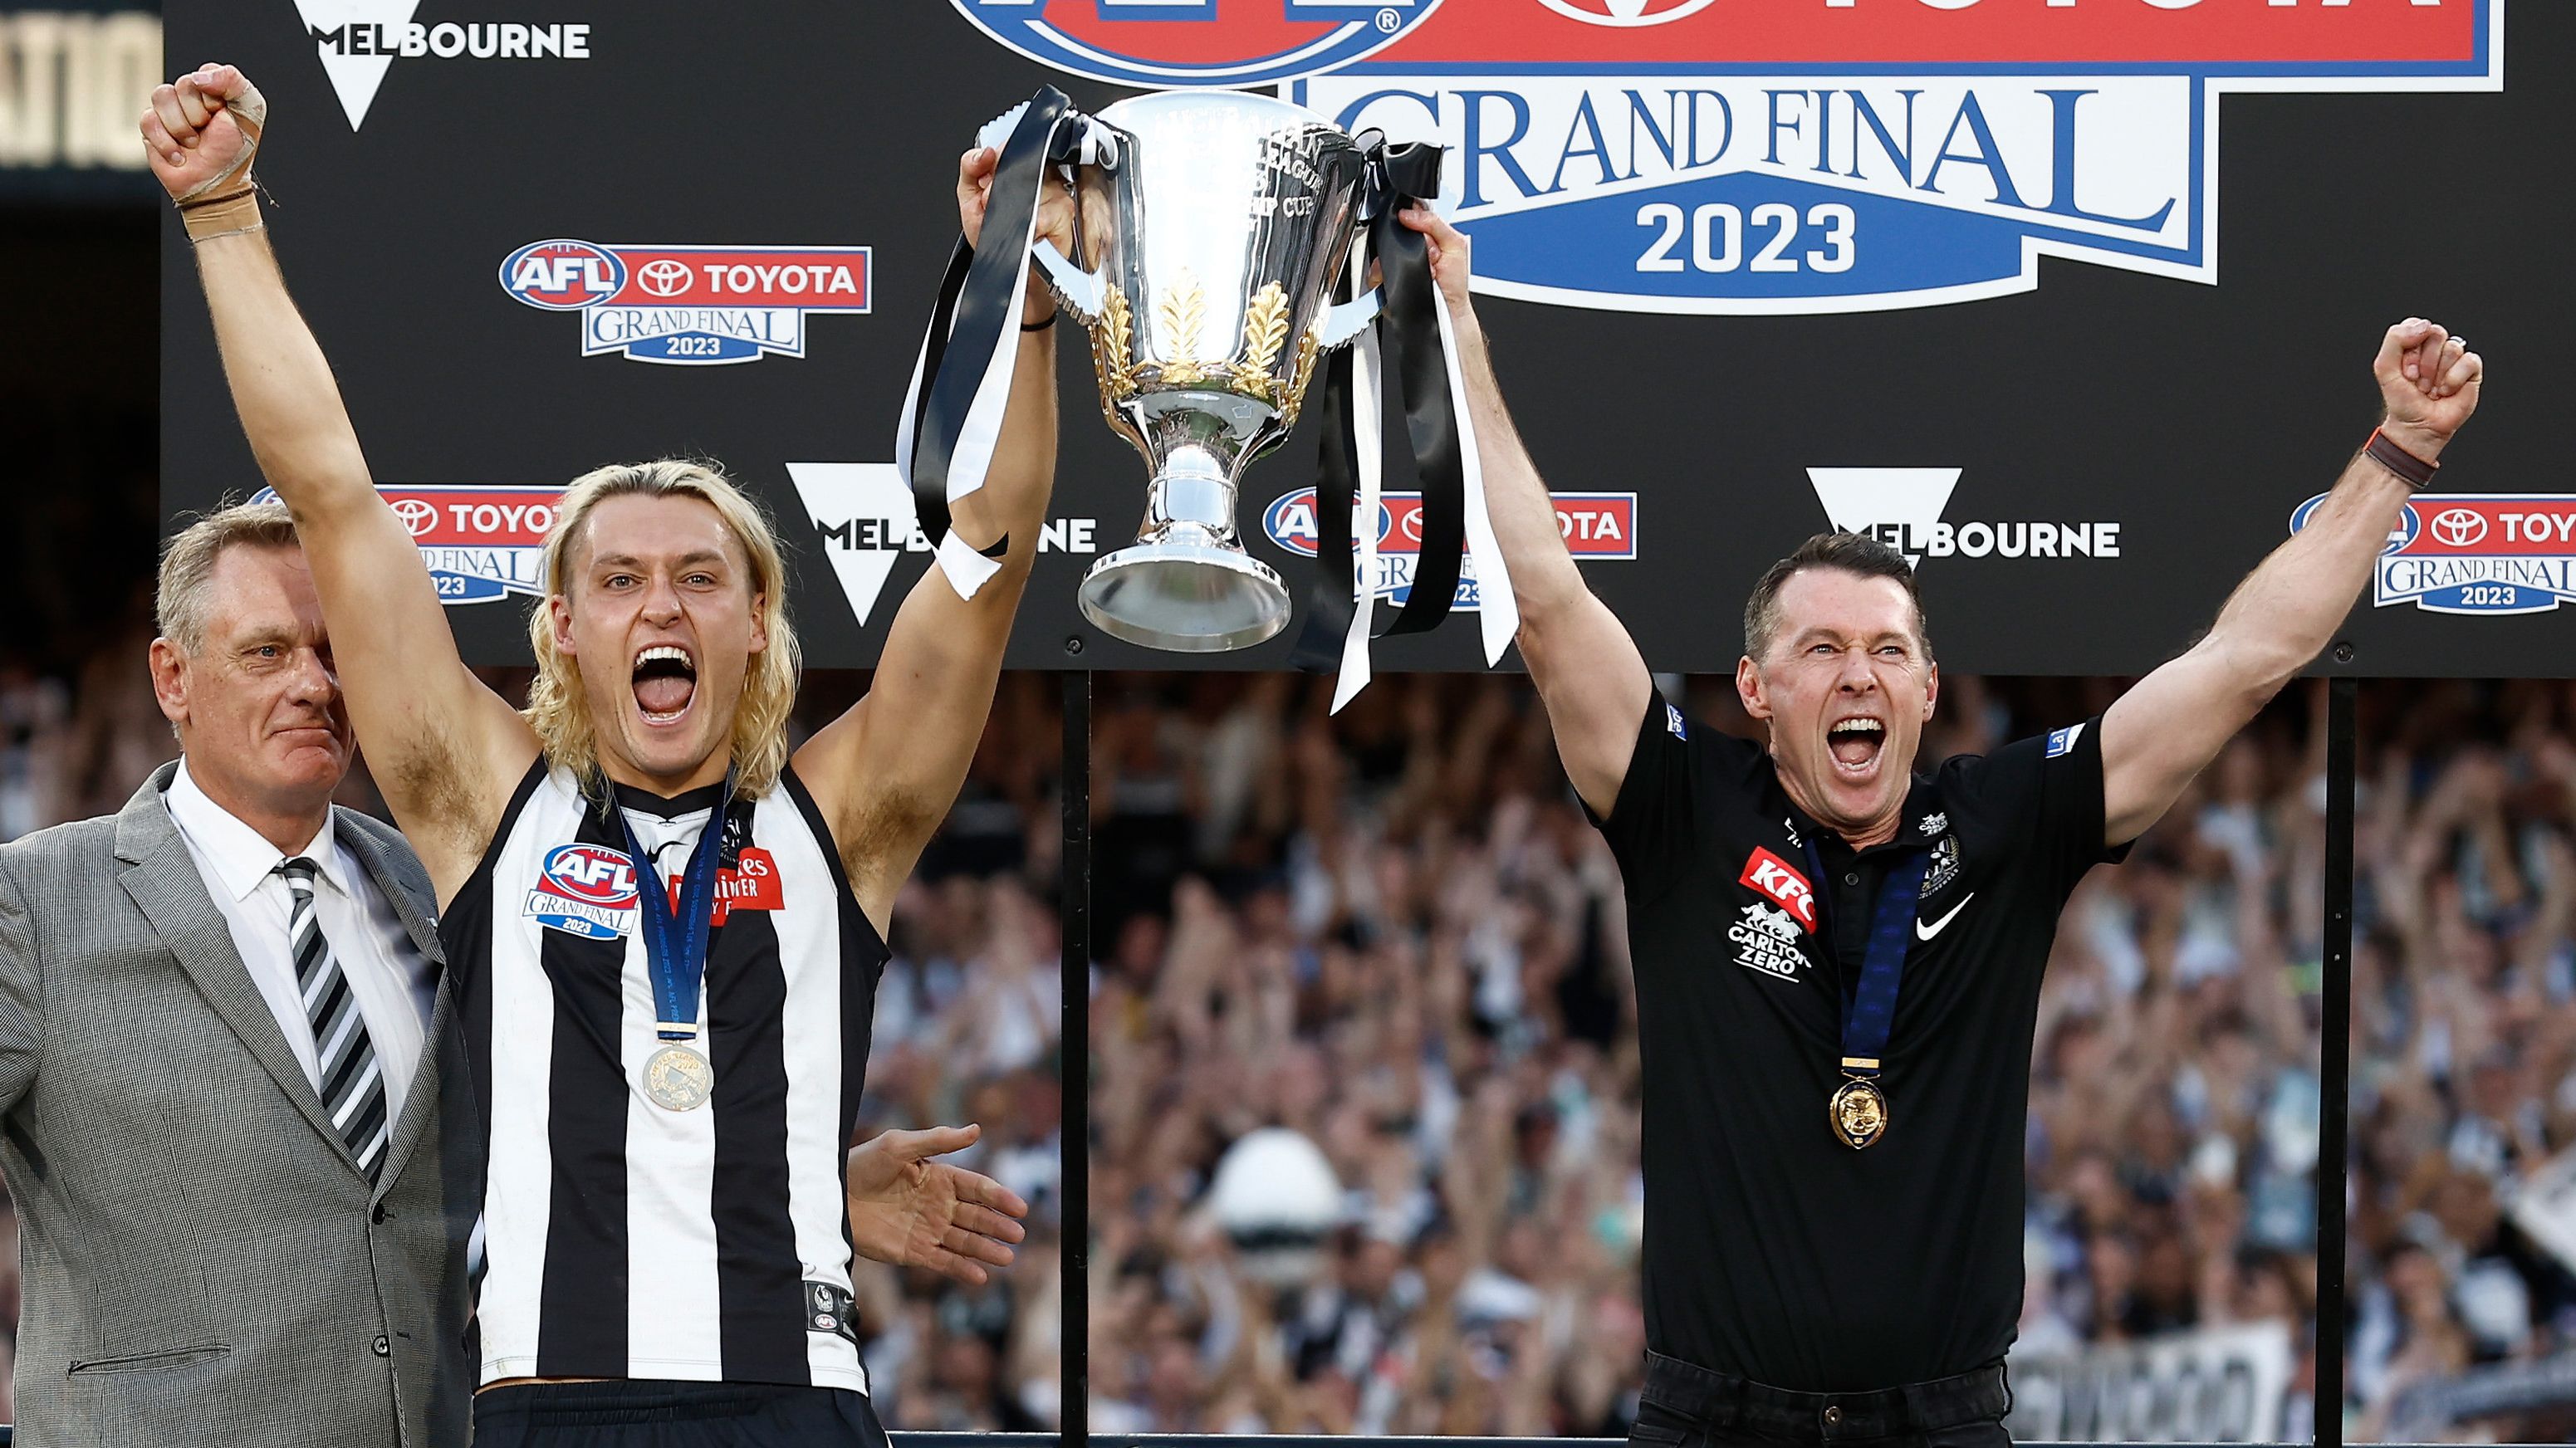 MELBOURNE, AUSTRALIA - SEPTEMBER 30: (L-R) Peter Moore, Darcy Moore of the Magpies and Craig McRae, Senior Coach of the Magpies hold the cup aloft during the 2023 AFL Grand Final match between the Collingwood Magpies and the Brisbane Lions at the Melbourne Cricket Ground on September 30, 2023 in Melbourne, Australia. (Photo by Michael Willson/AFL Photos via Getty Images)